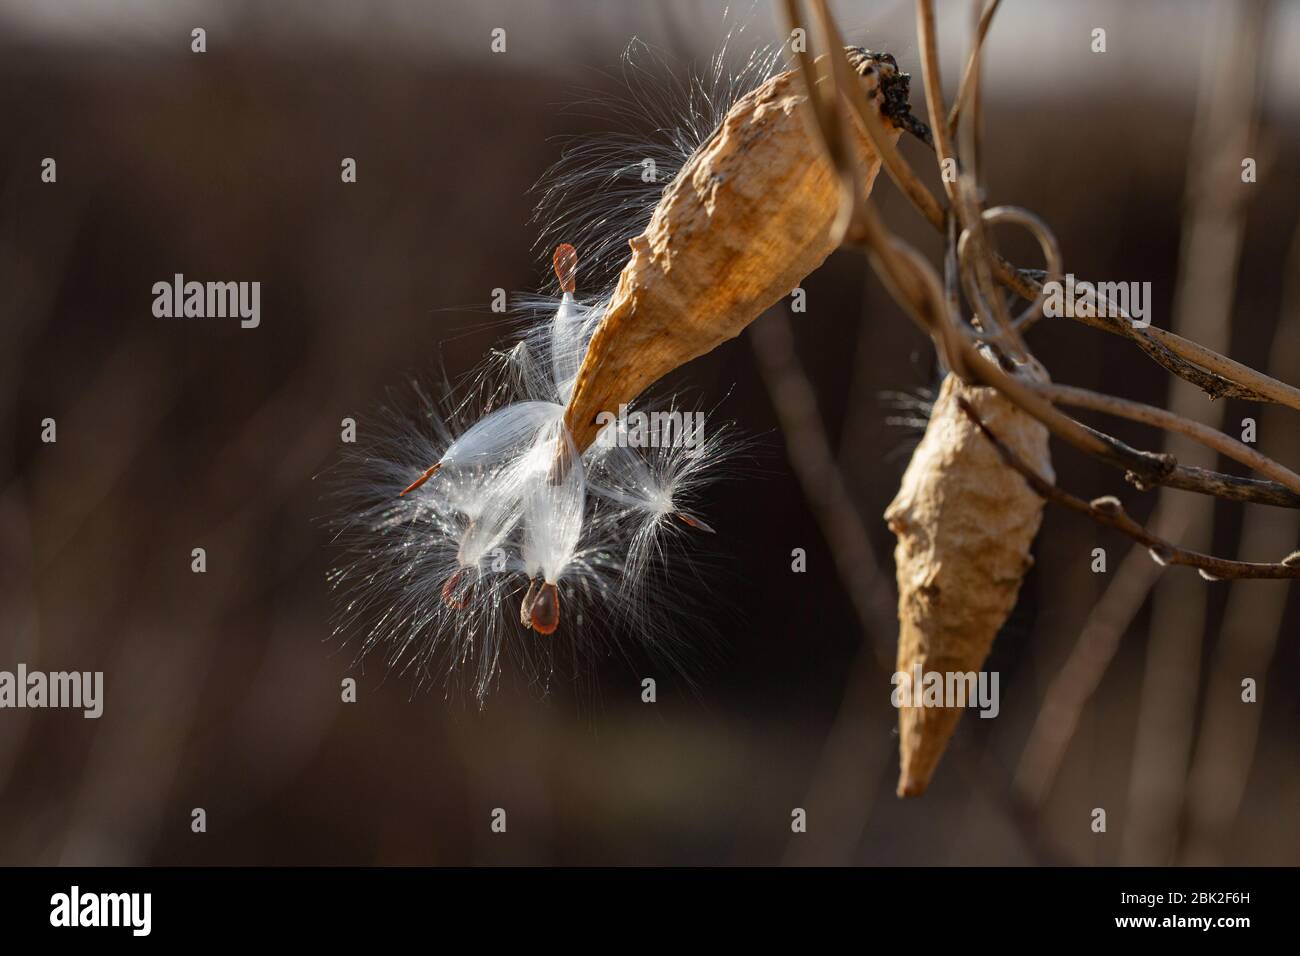 close up milkweed (Asclepias syriaca) seeds hanging on a branch Stock Photo